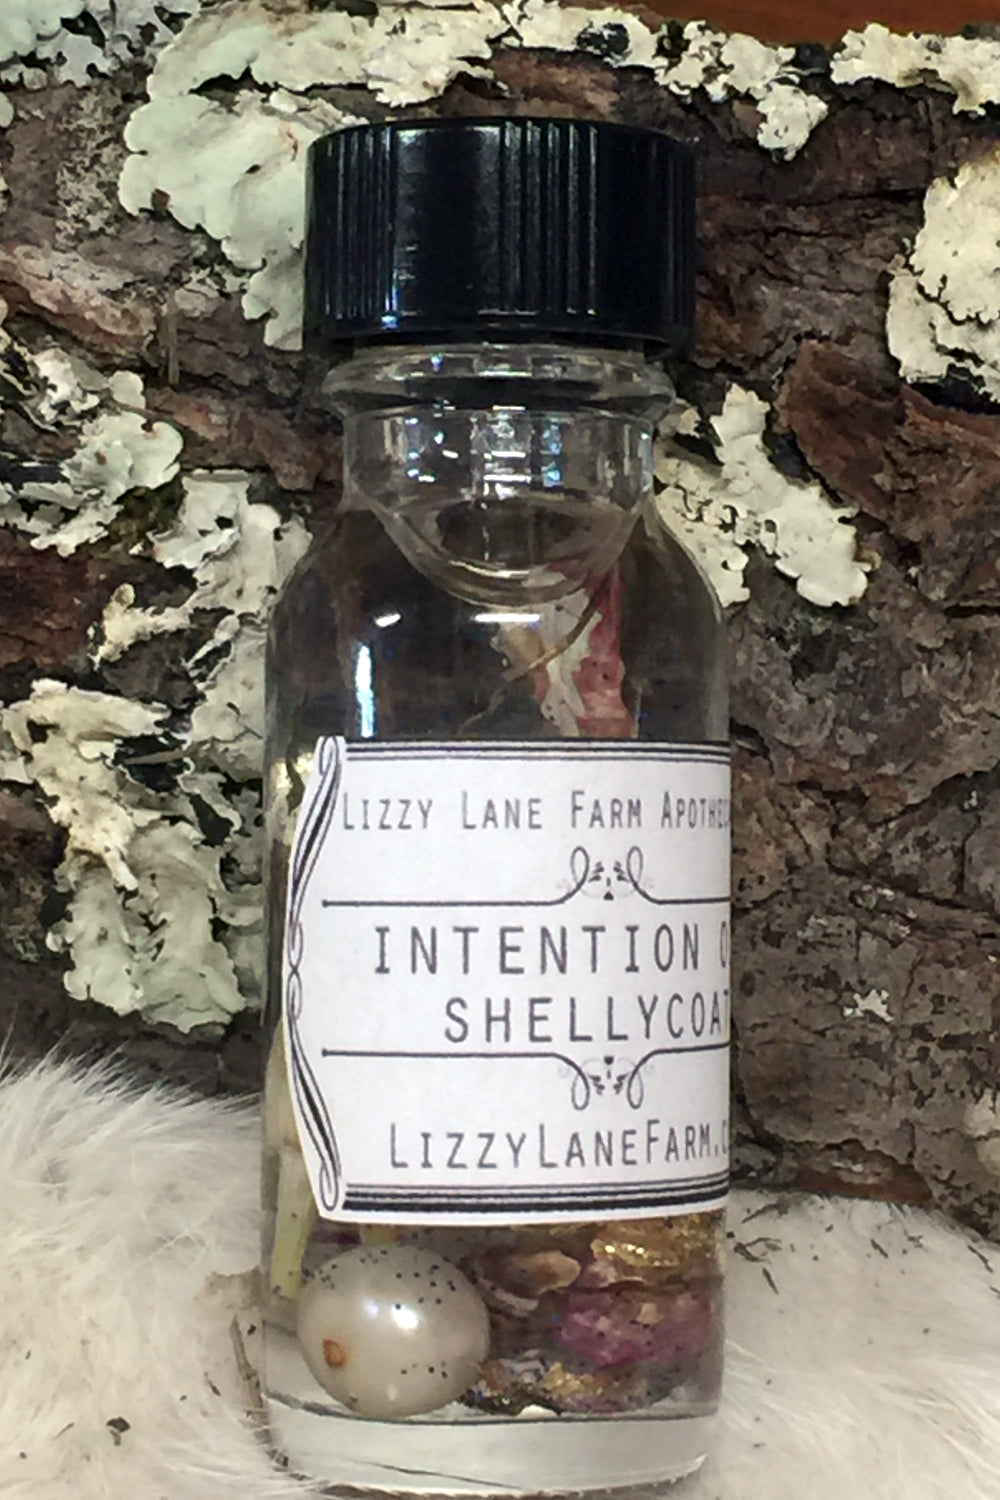 shellycoat intention oil- lizzy lane farm apothecary